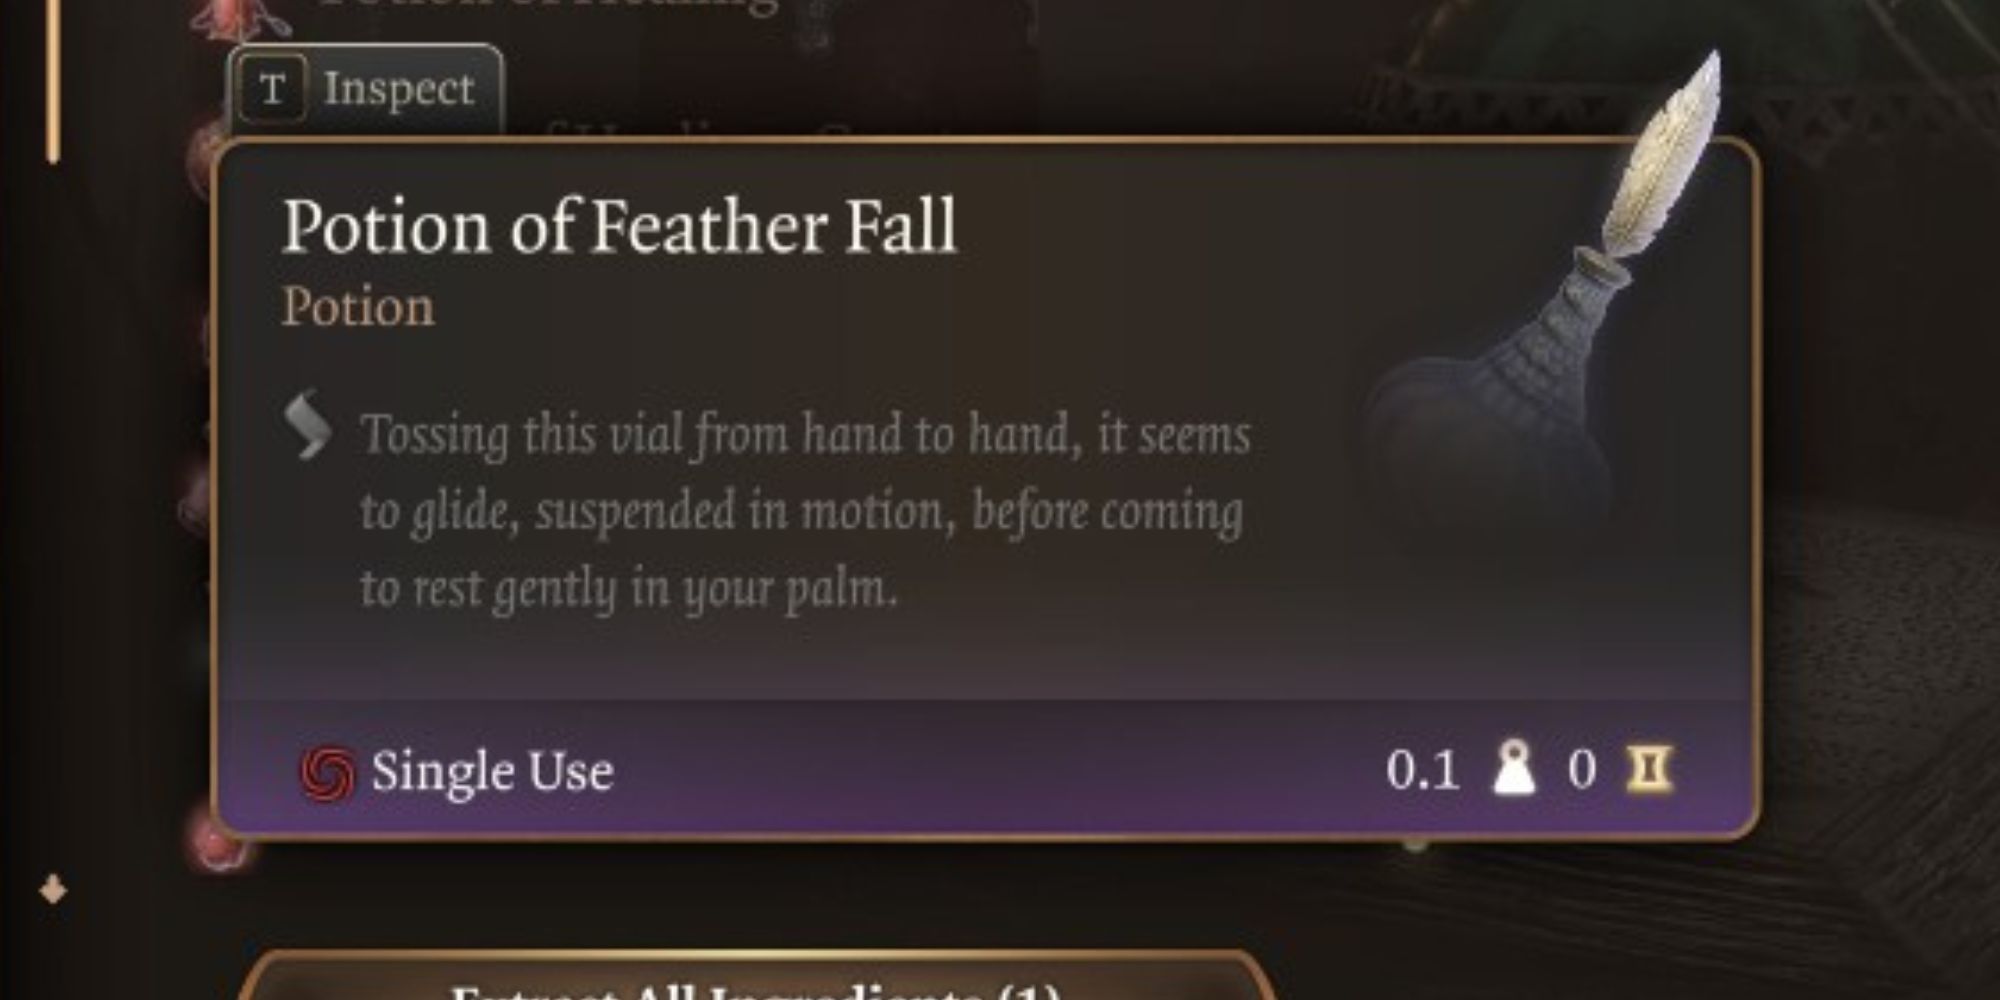 A Potion of Feather Fall in Baldur's Gate 3